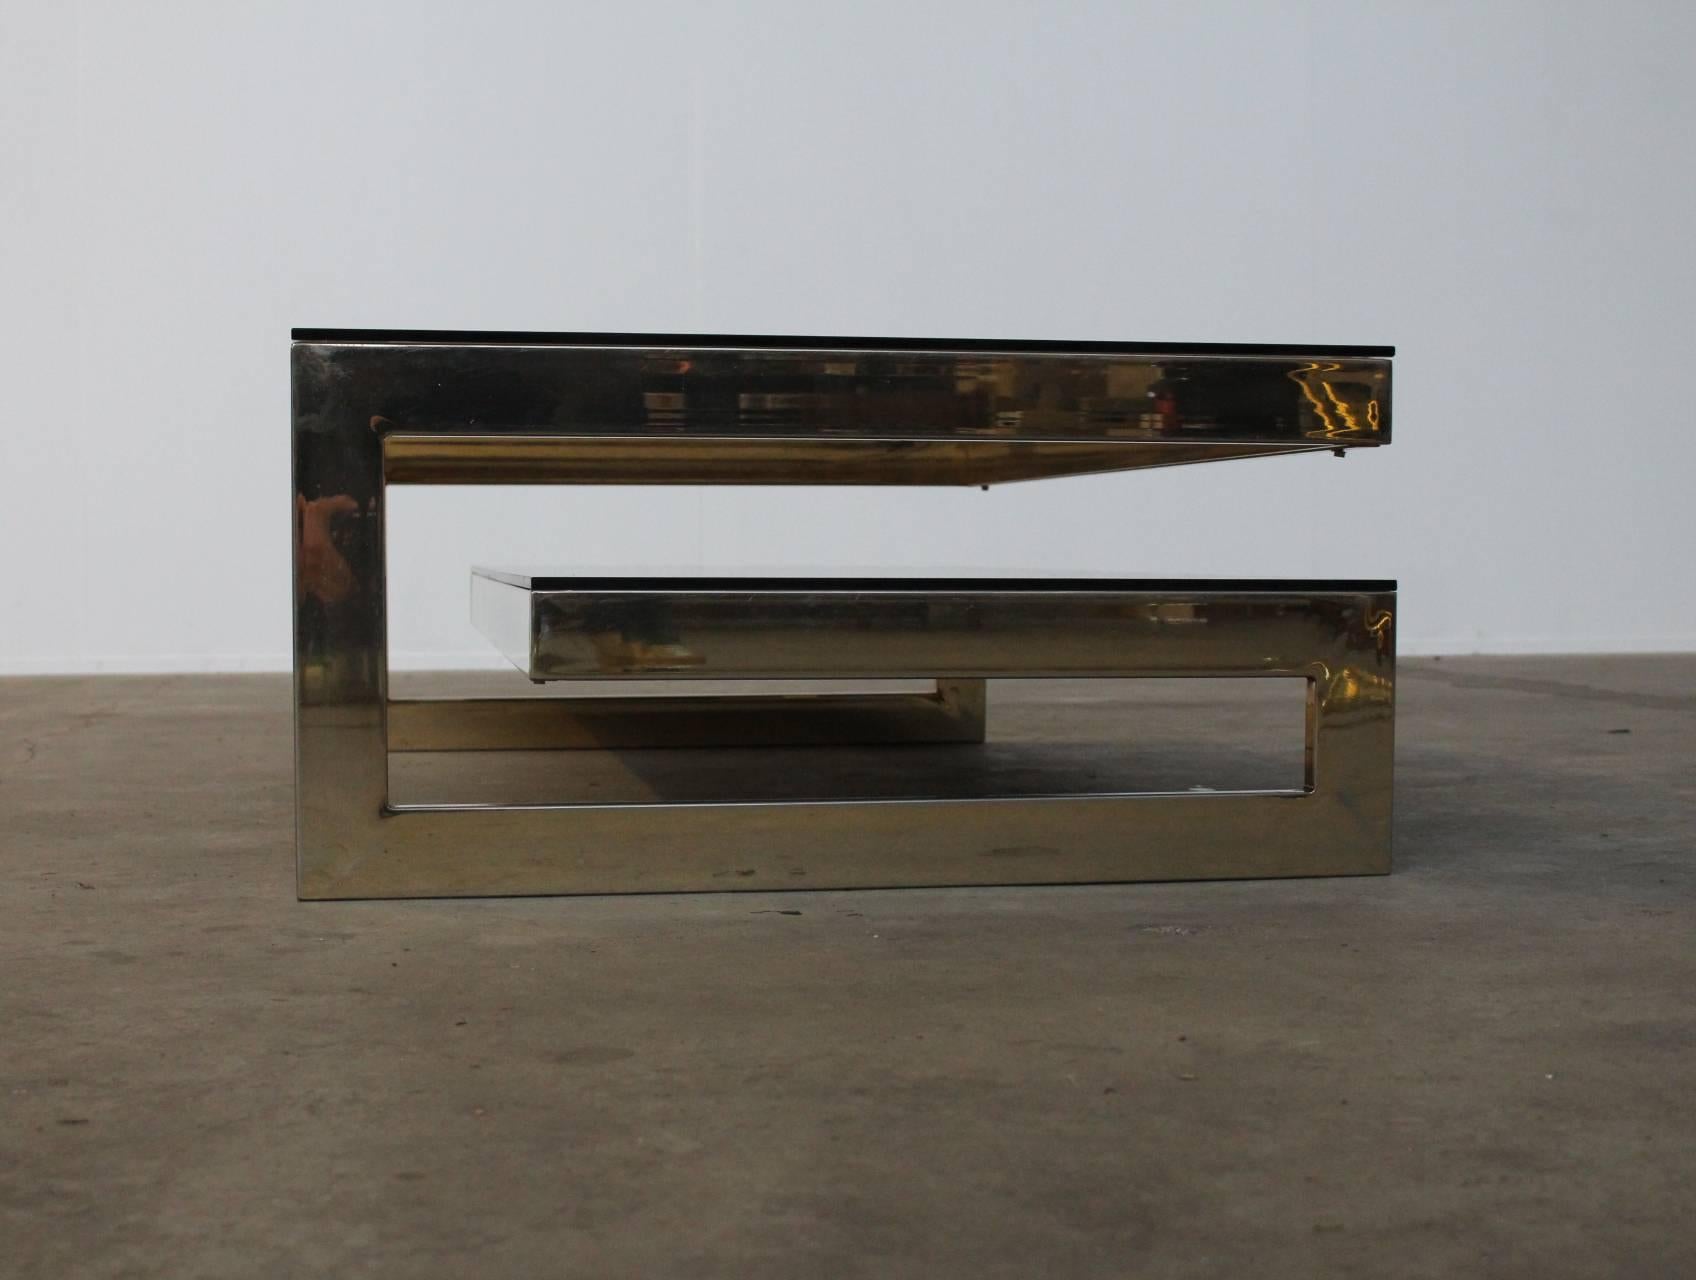 Stunning architectual two-tiered rectangular gold plated 23ct coffee table attributed to Maison Jansen, circa 1970. A very eye-catching minimalist design. On the bottom level a smoked mirror and on the upper level a dark smoked glass top. The frame